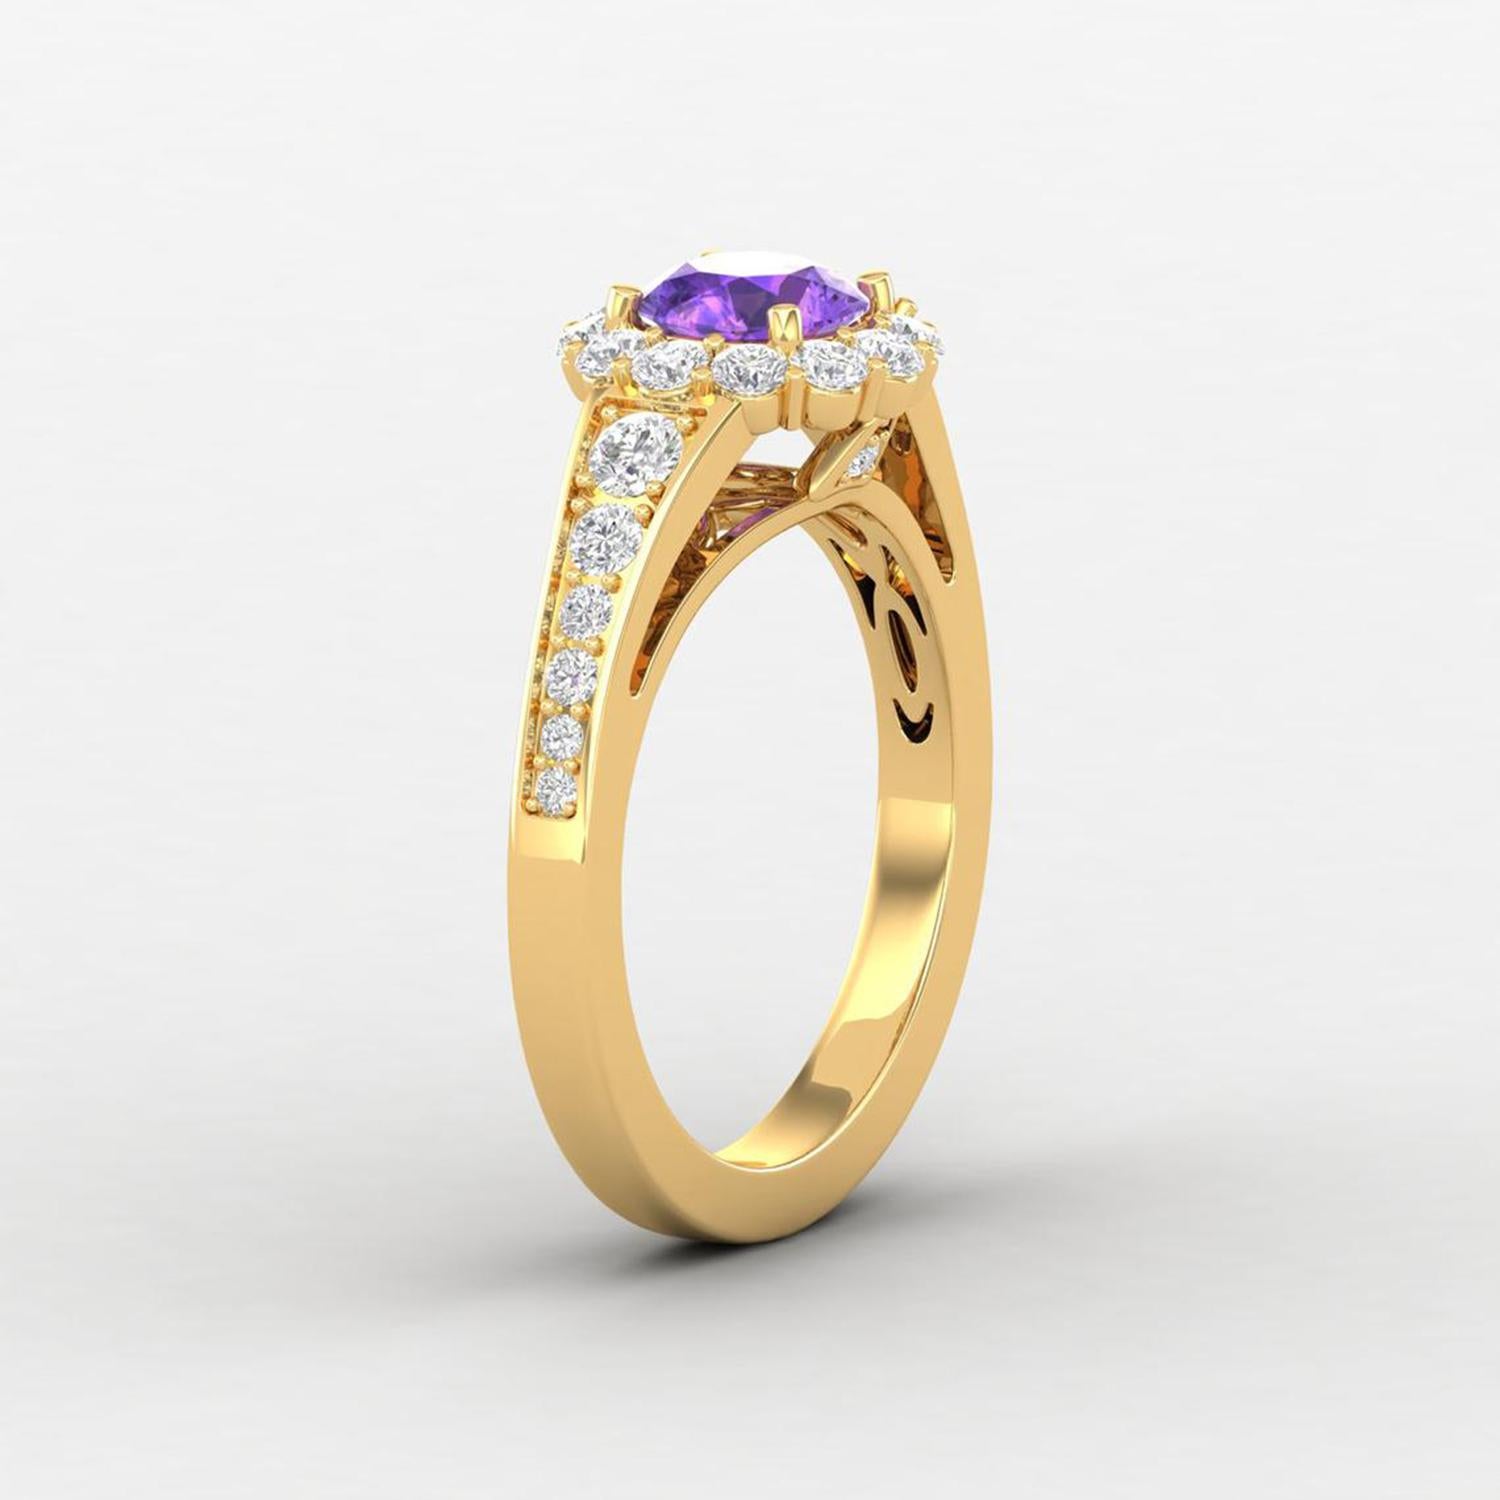 Modern 14 Karat Gold Round Amethyst Ring / Round Diamond Ring / Solitaire Ring For Sale